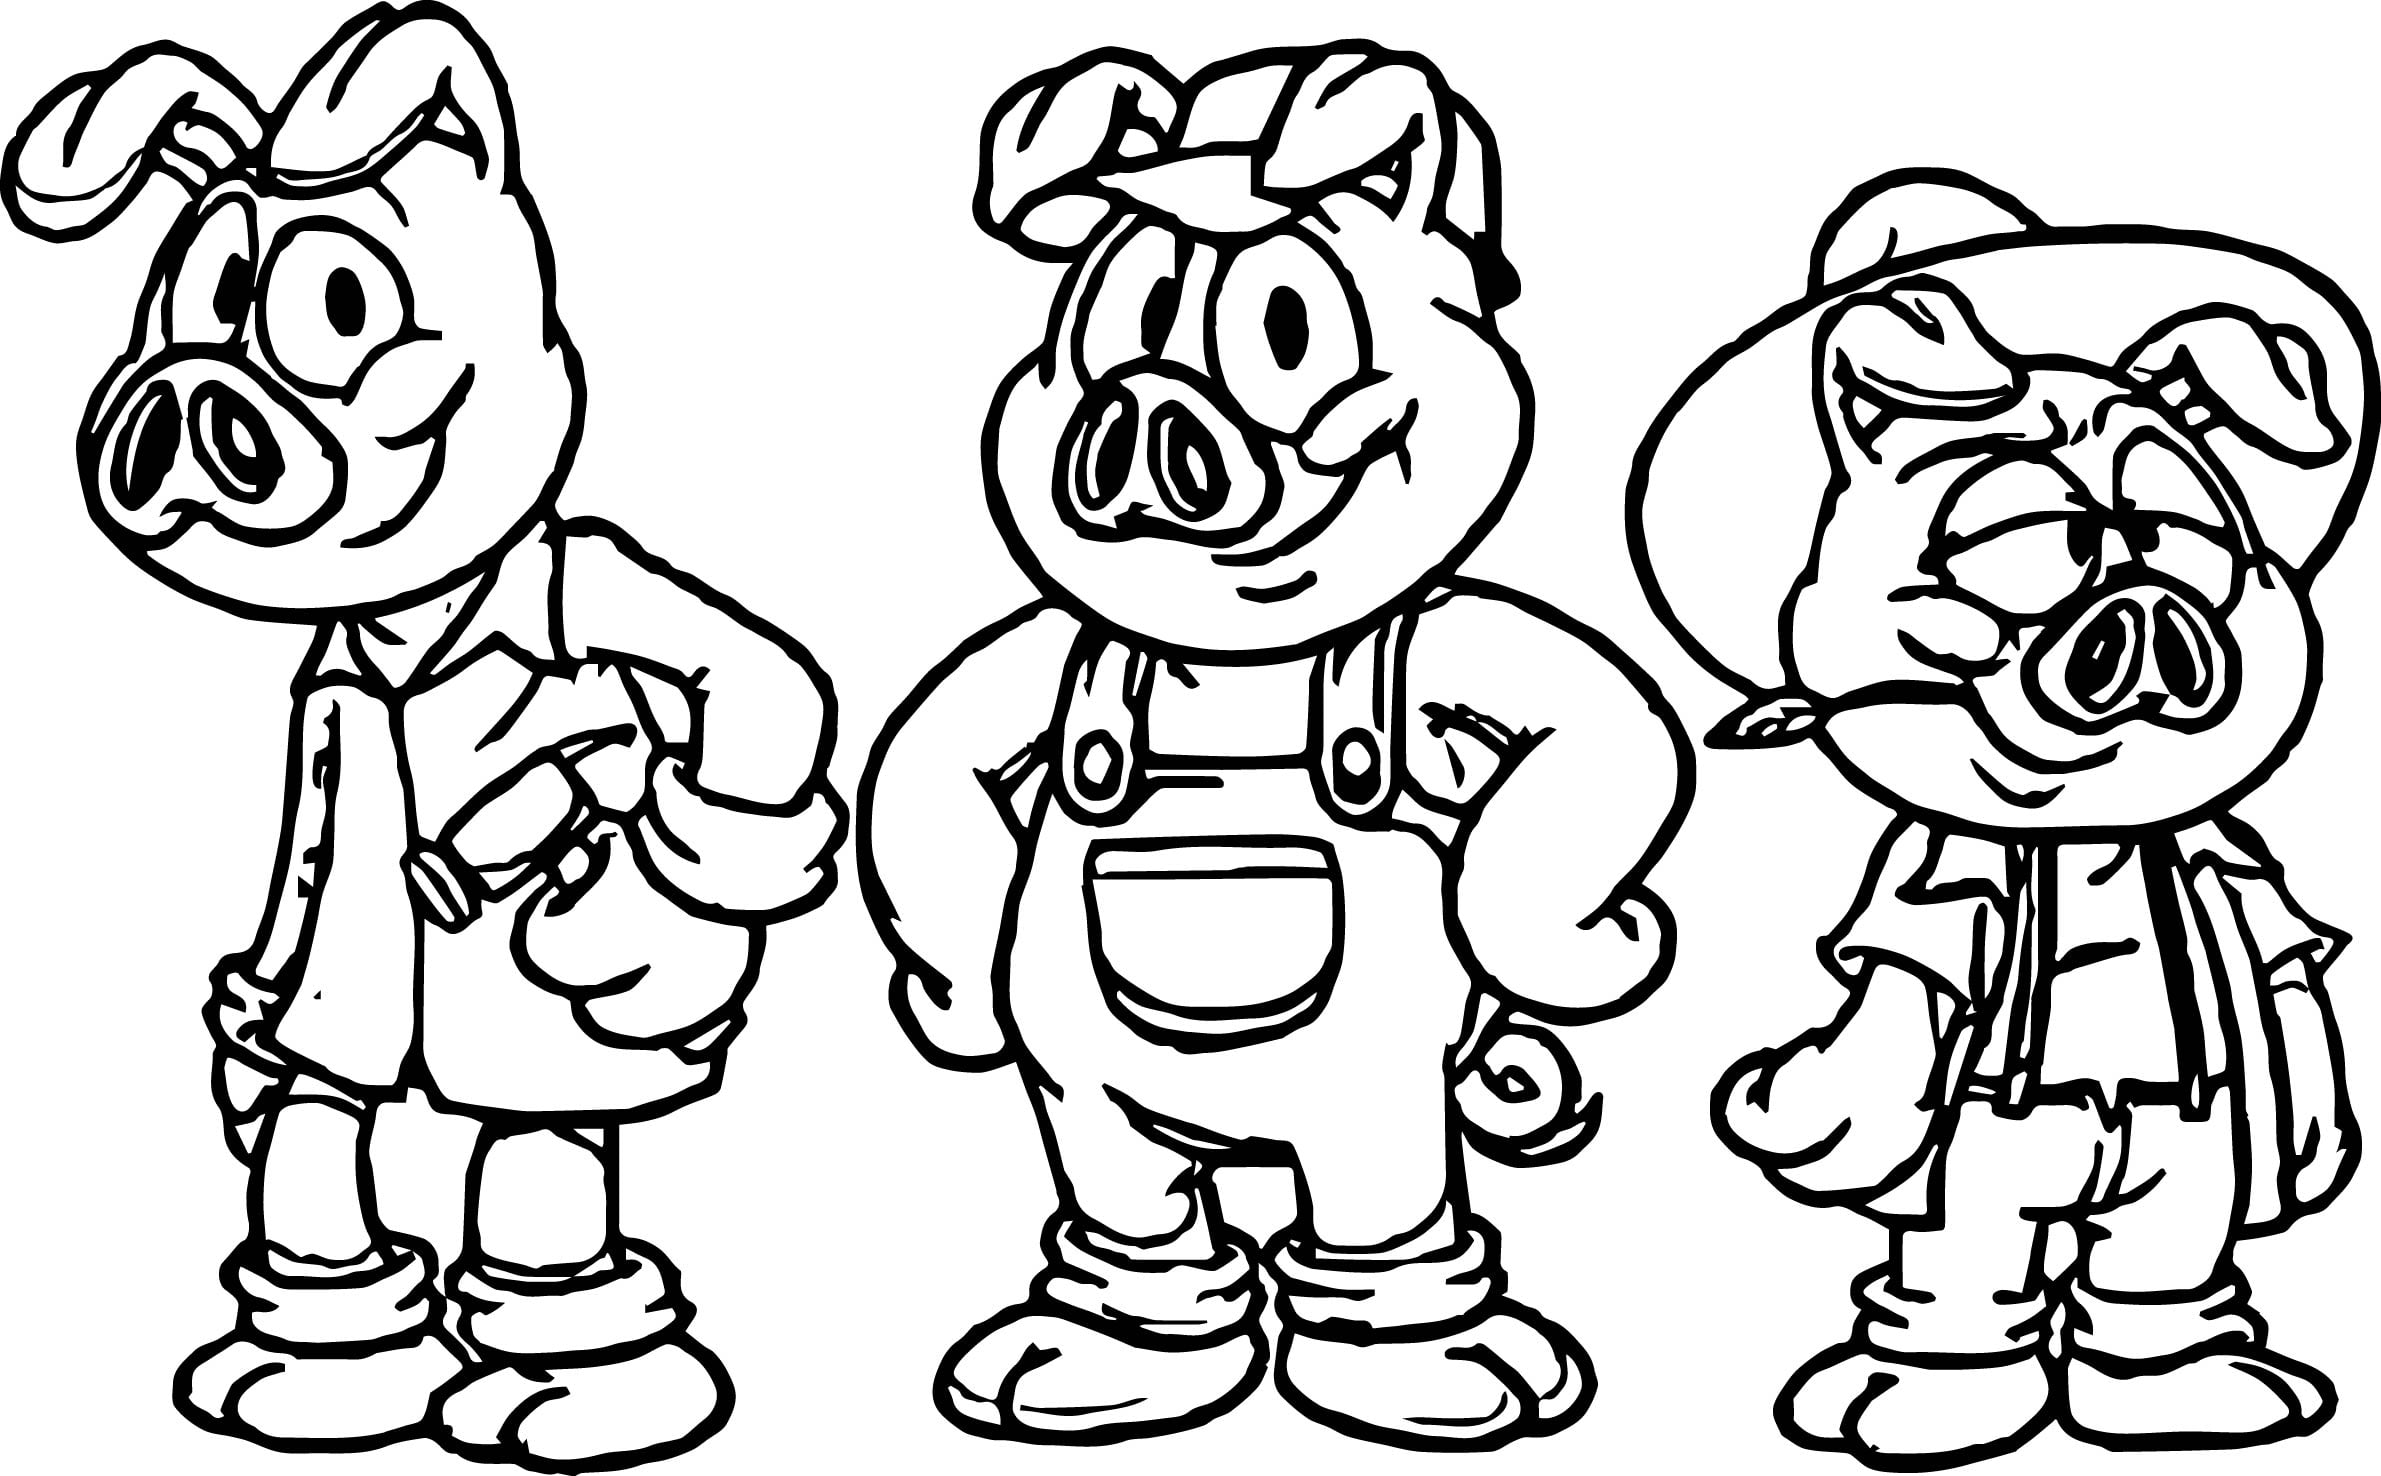 Best Cartoon 3 Little Pigs Coloring Page Wecoloringpagecom